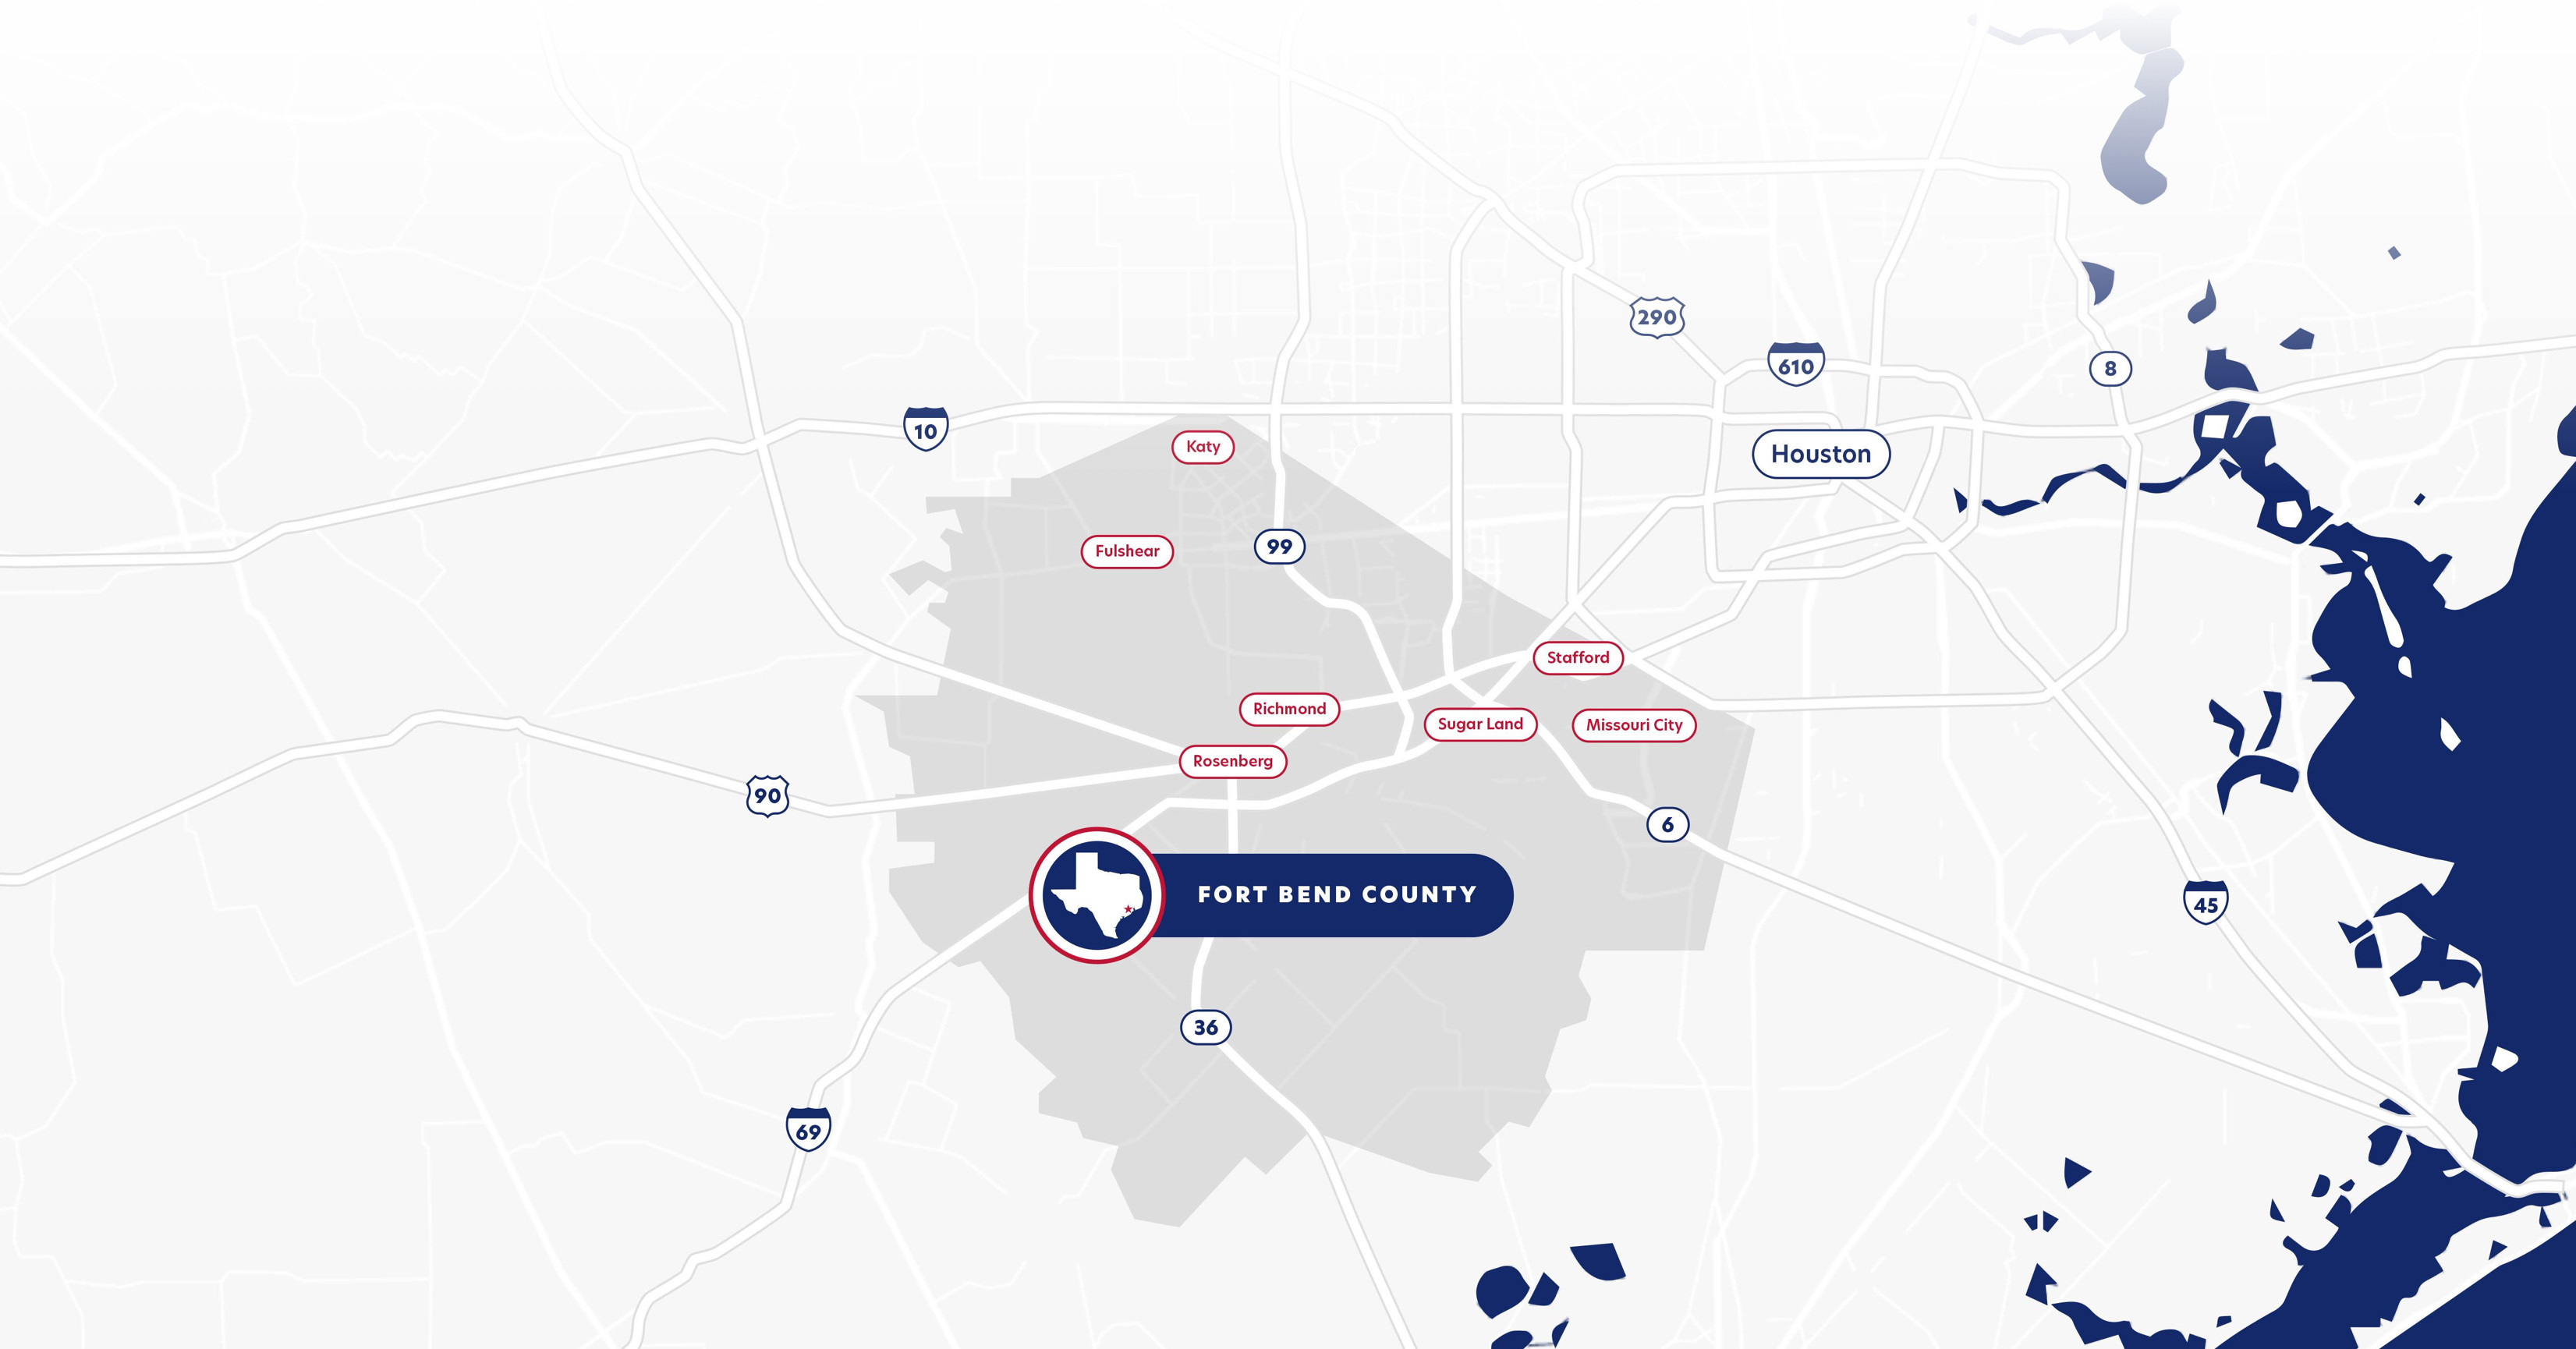 Graphic map of Fort Bend County and Greater Houston Area